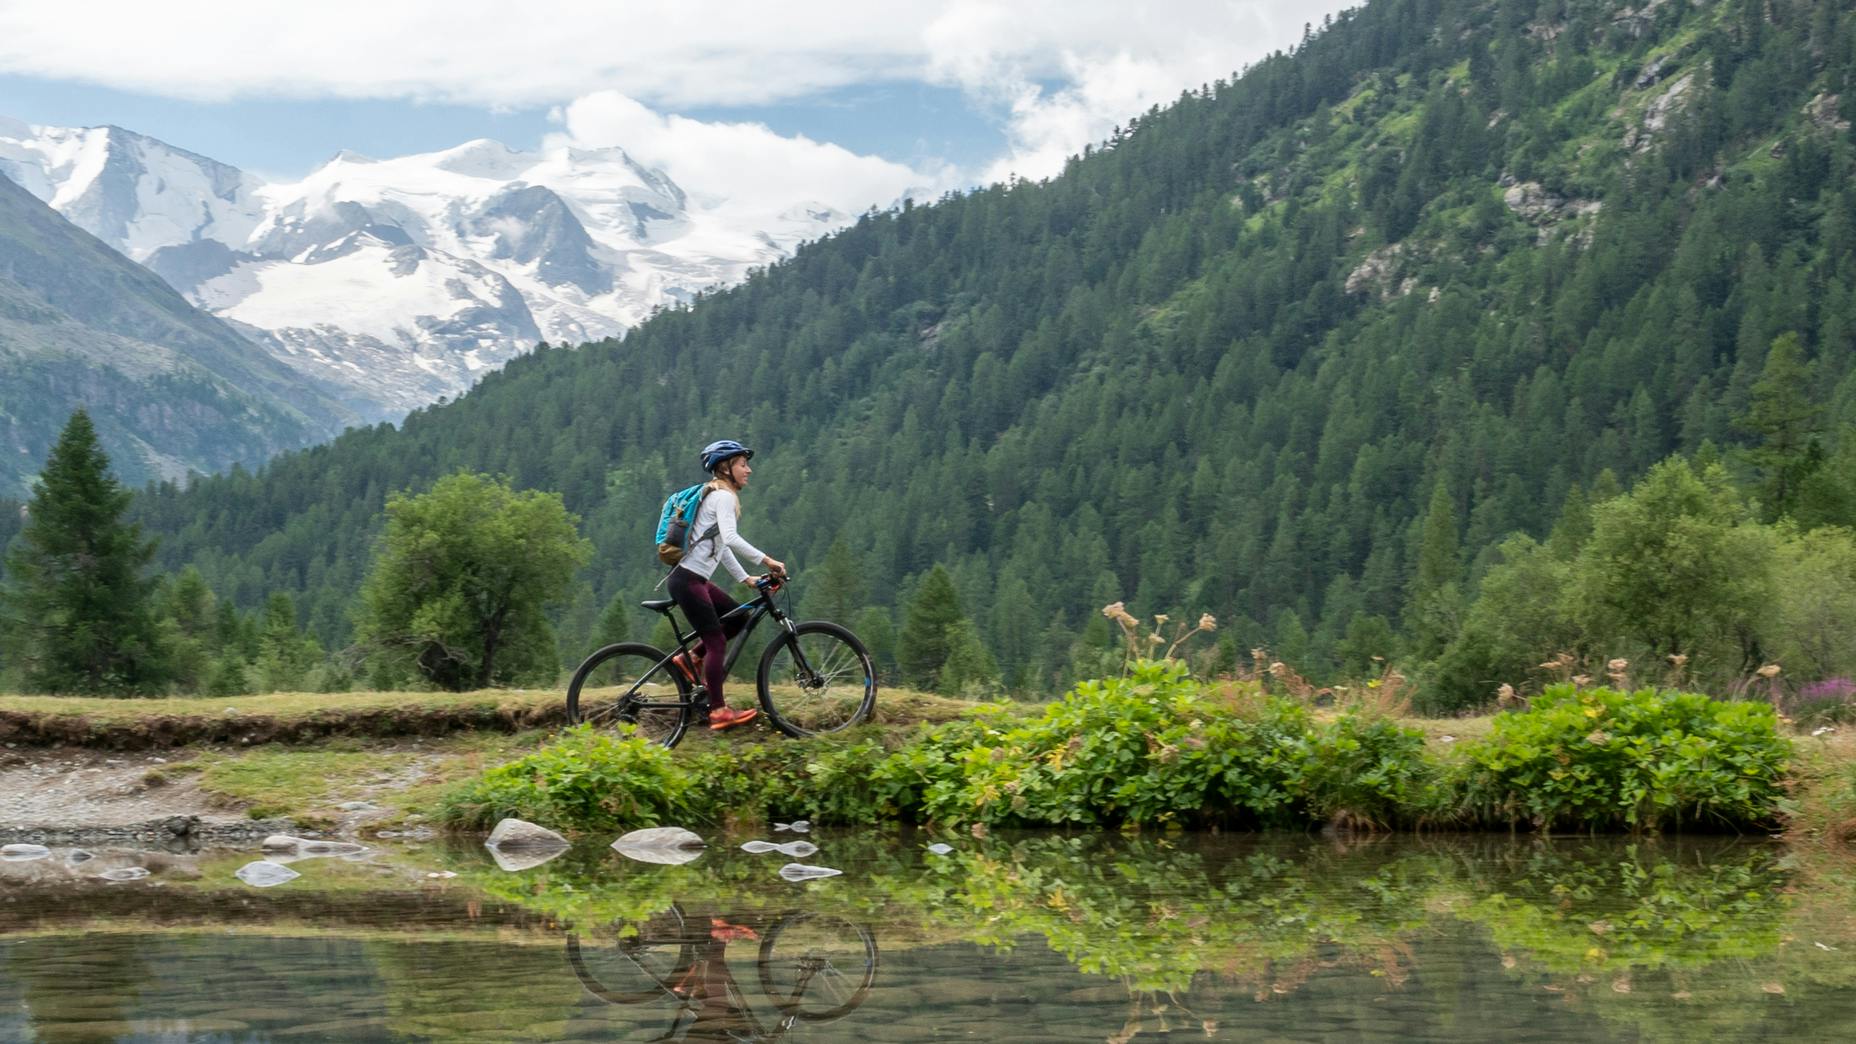 A woman on a mountain bike rides next to a pond with mountains and hills behind her